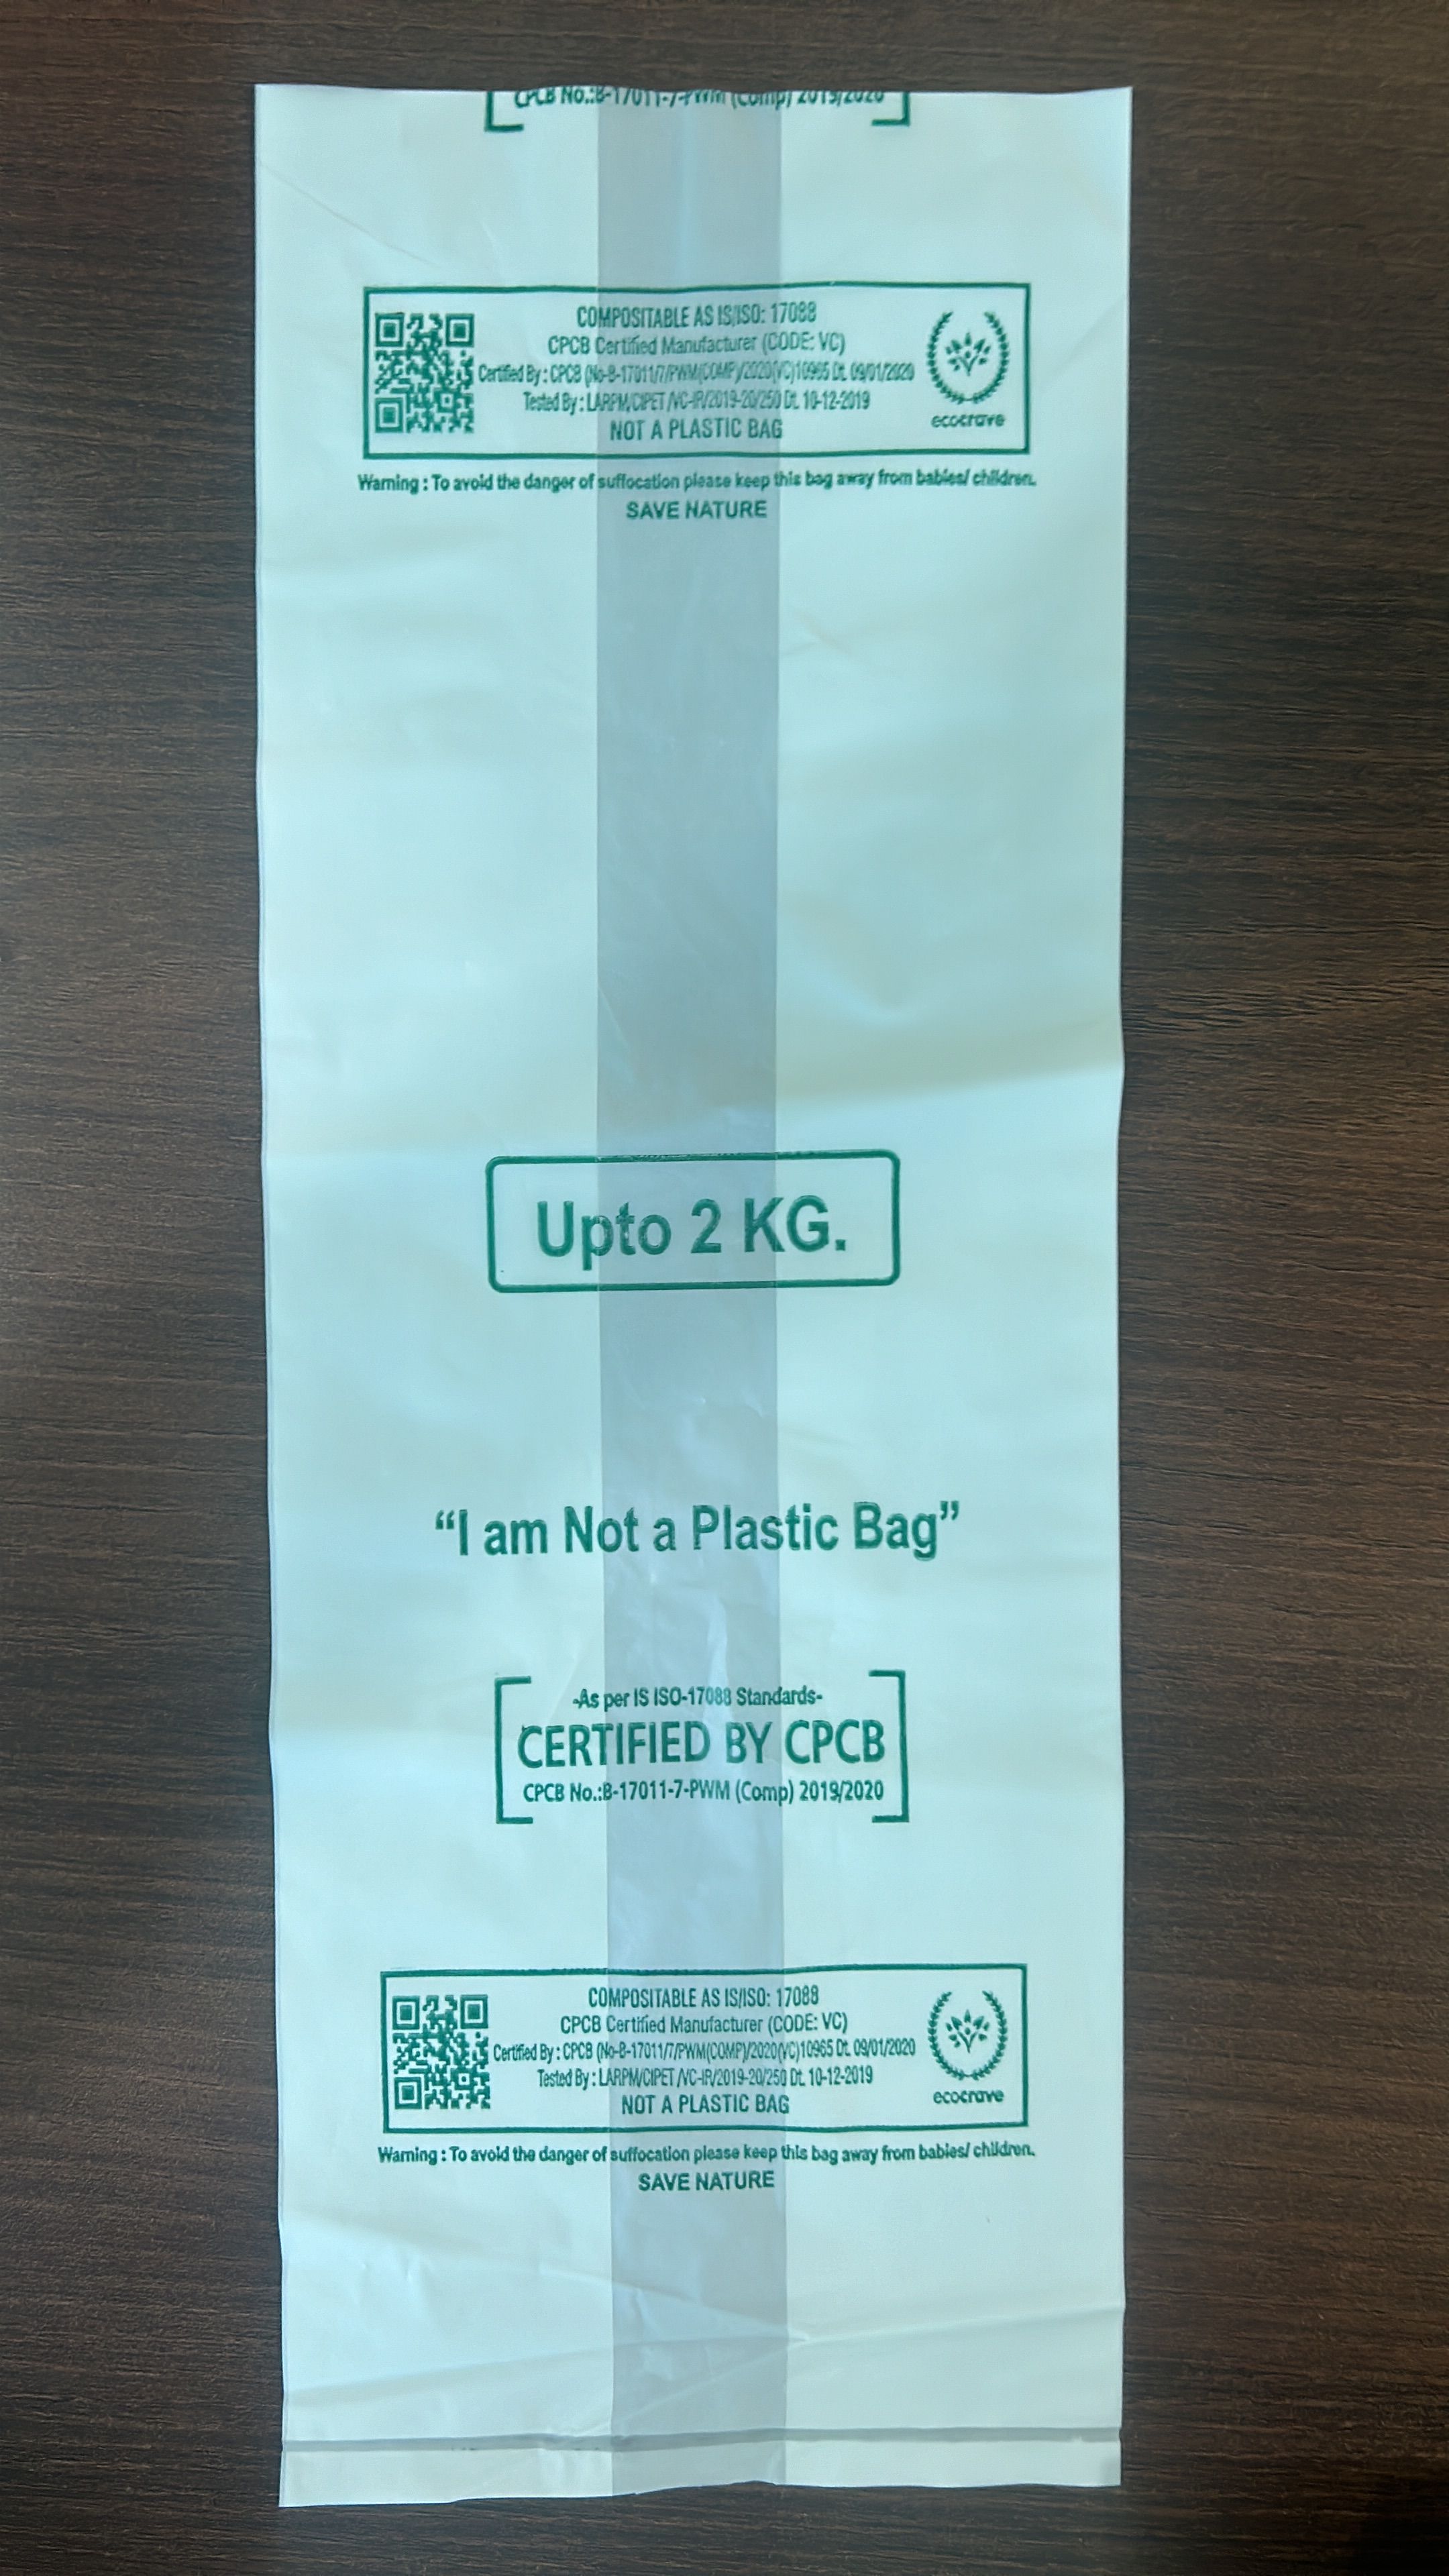 Biodegradable covers